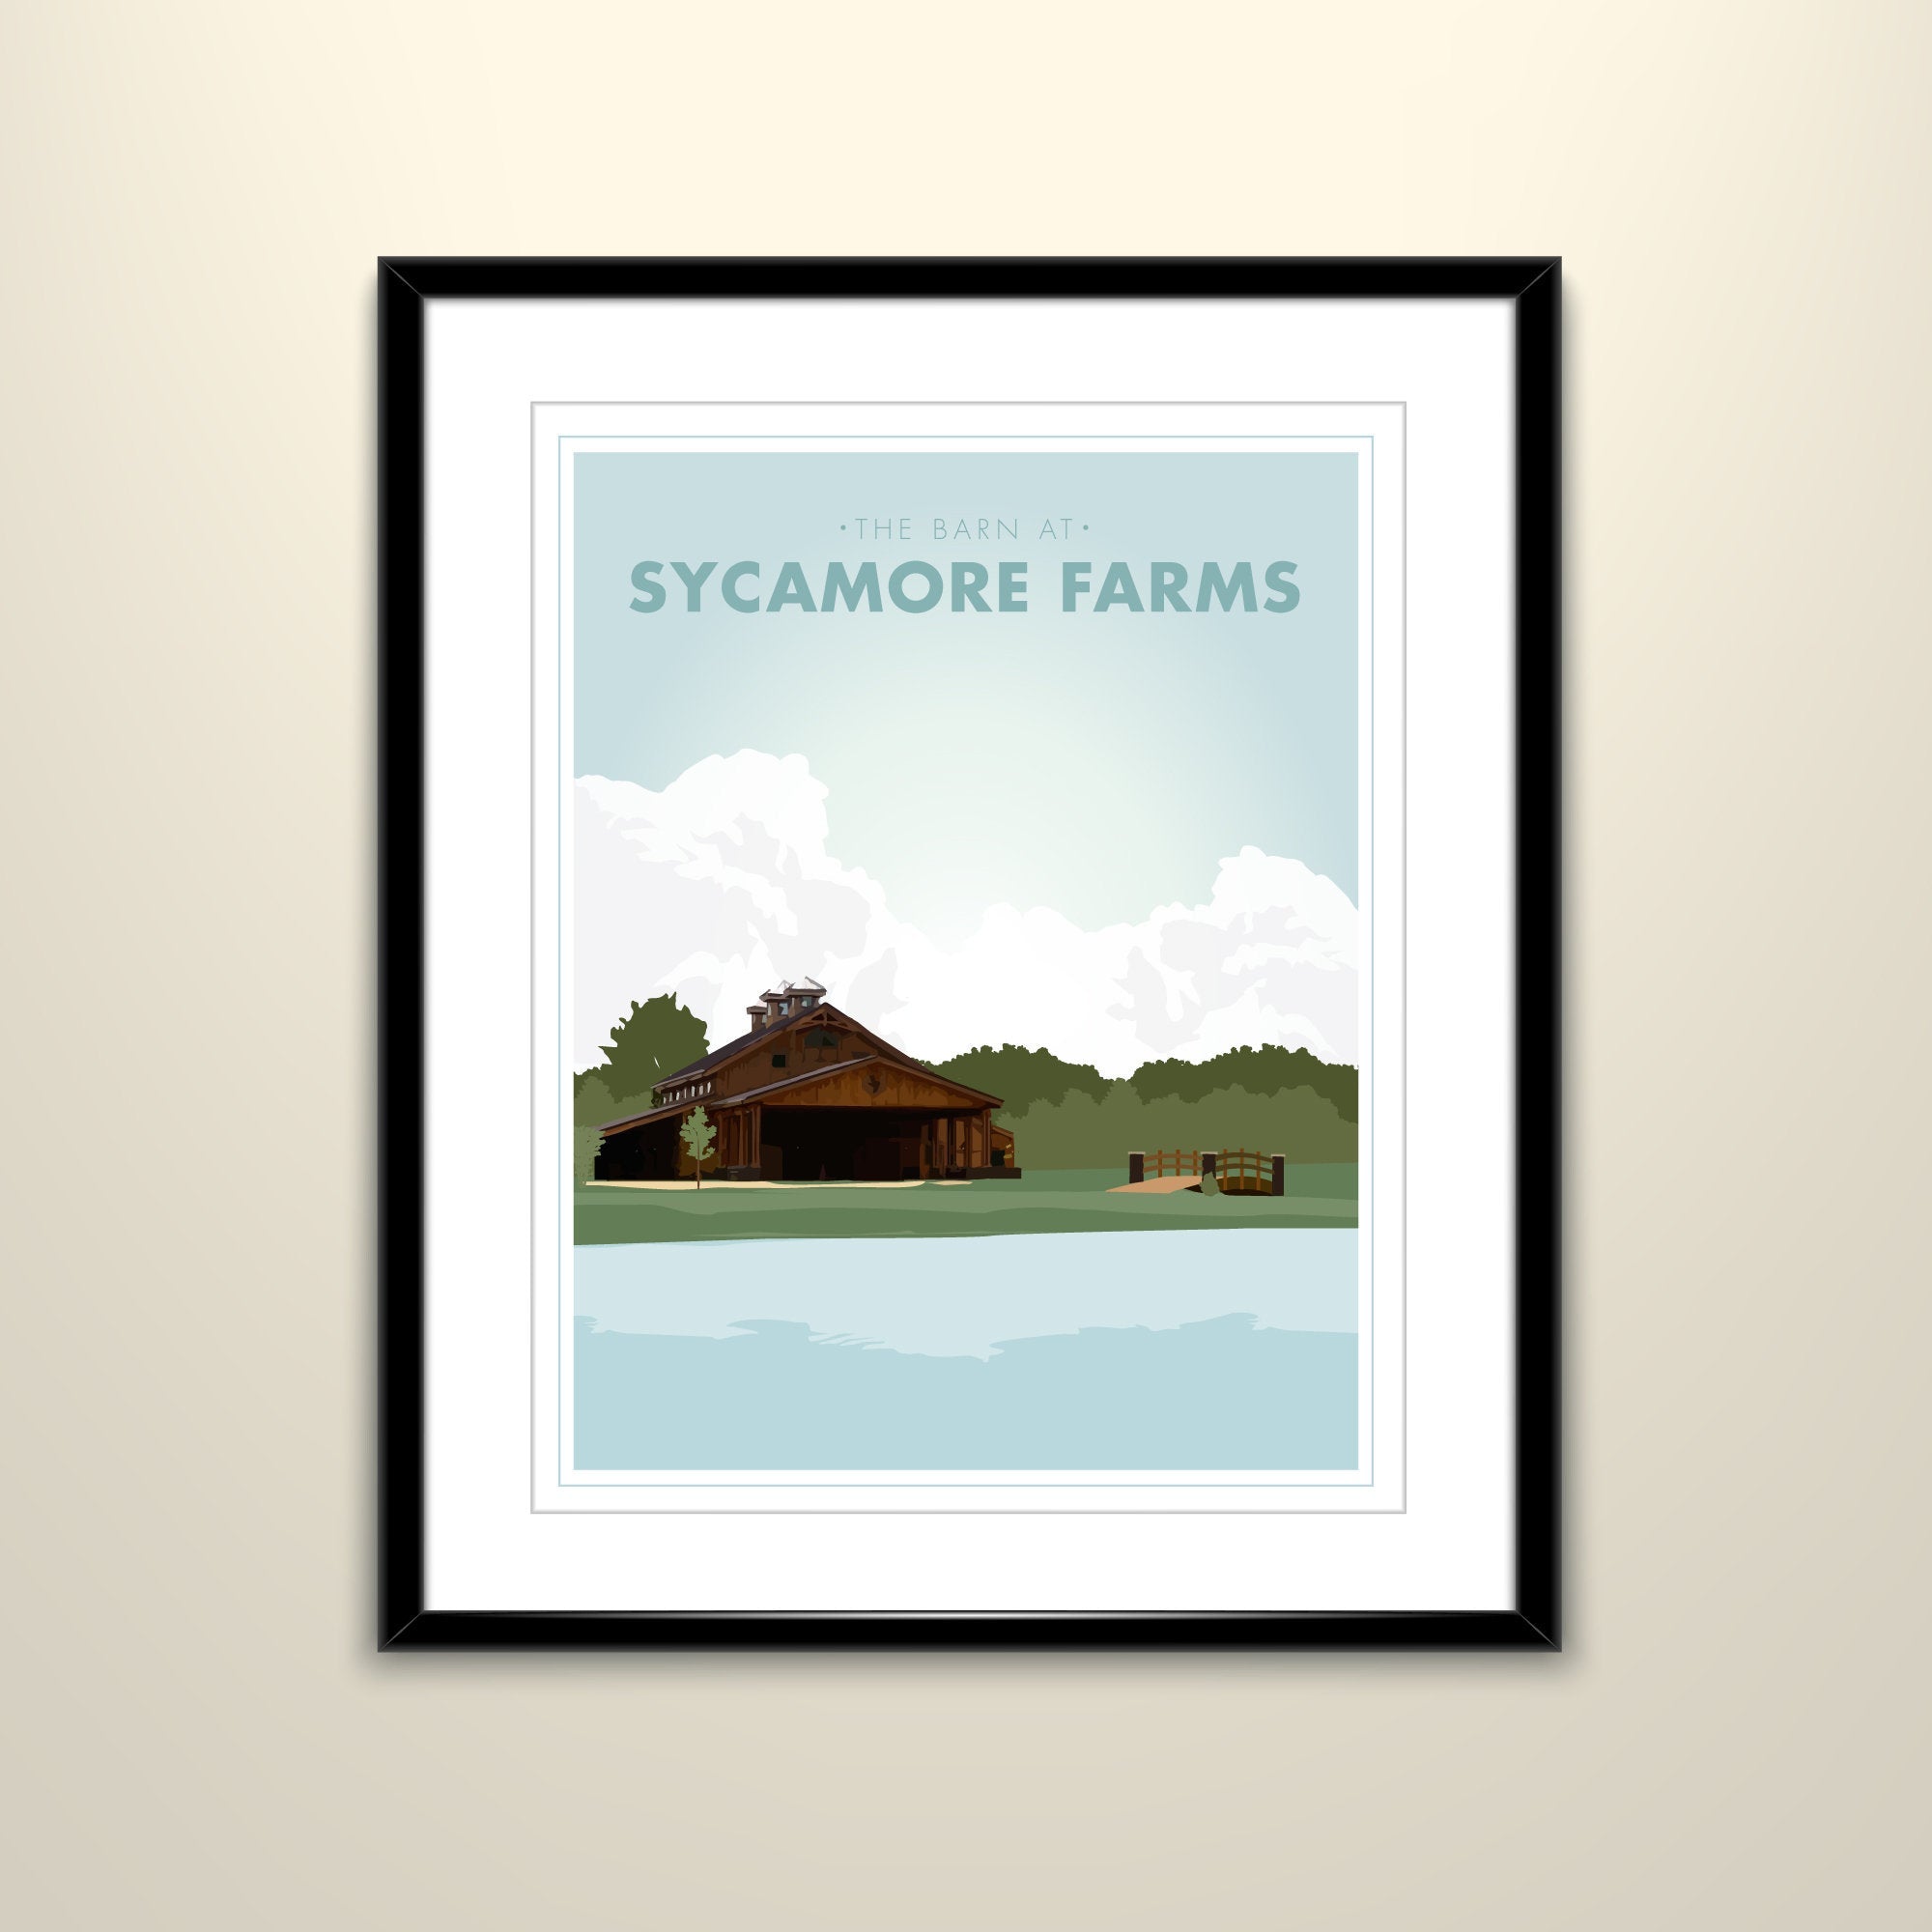 The Barn at Sycamore Farms Travel 11x14 Paper Poster - Wedding Poster personalized with Names and date (frame not included)